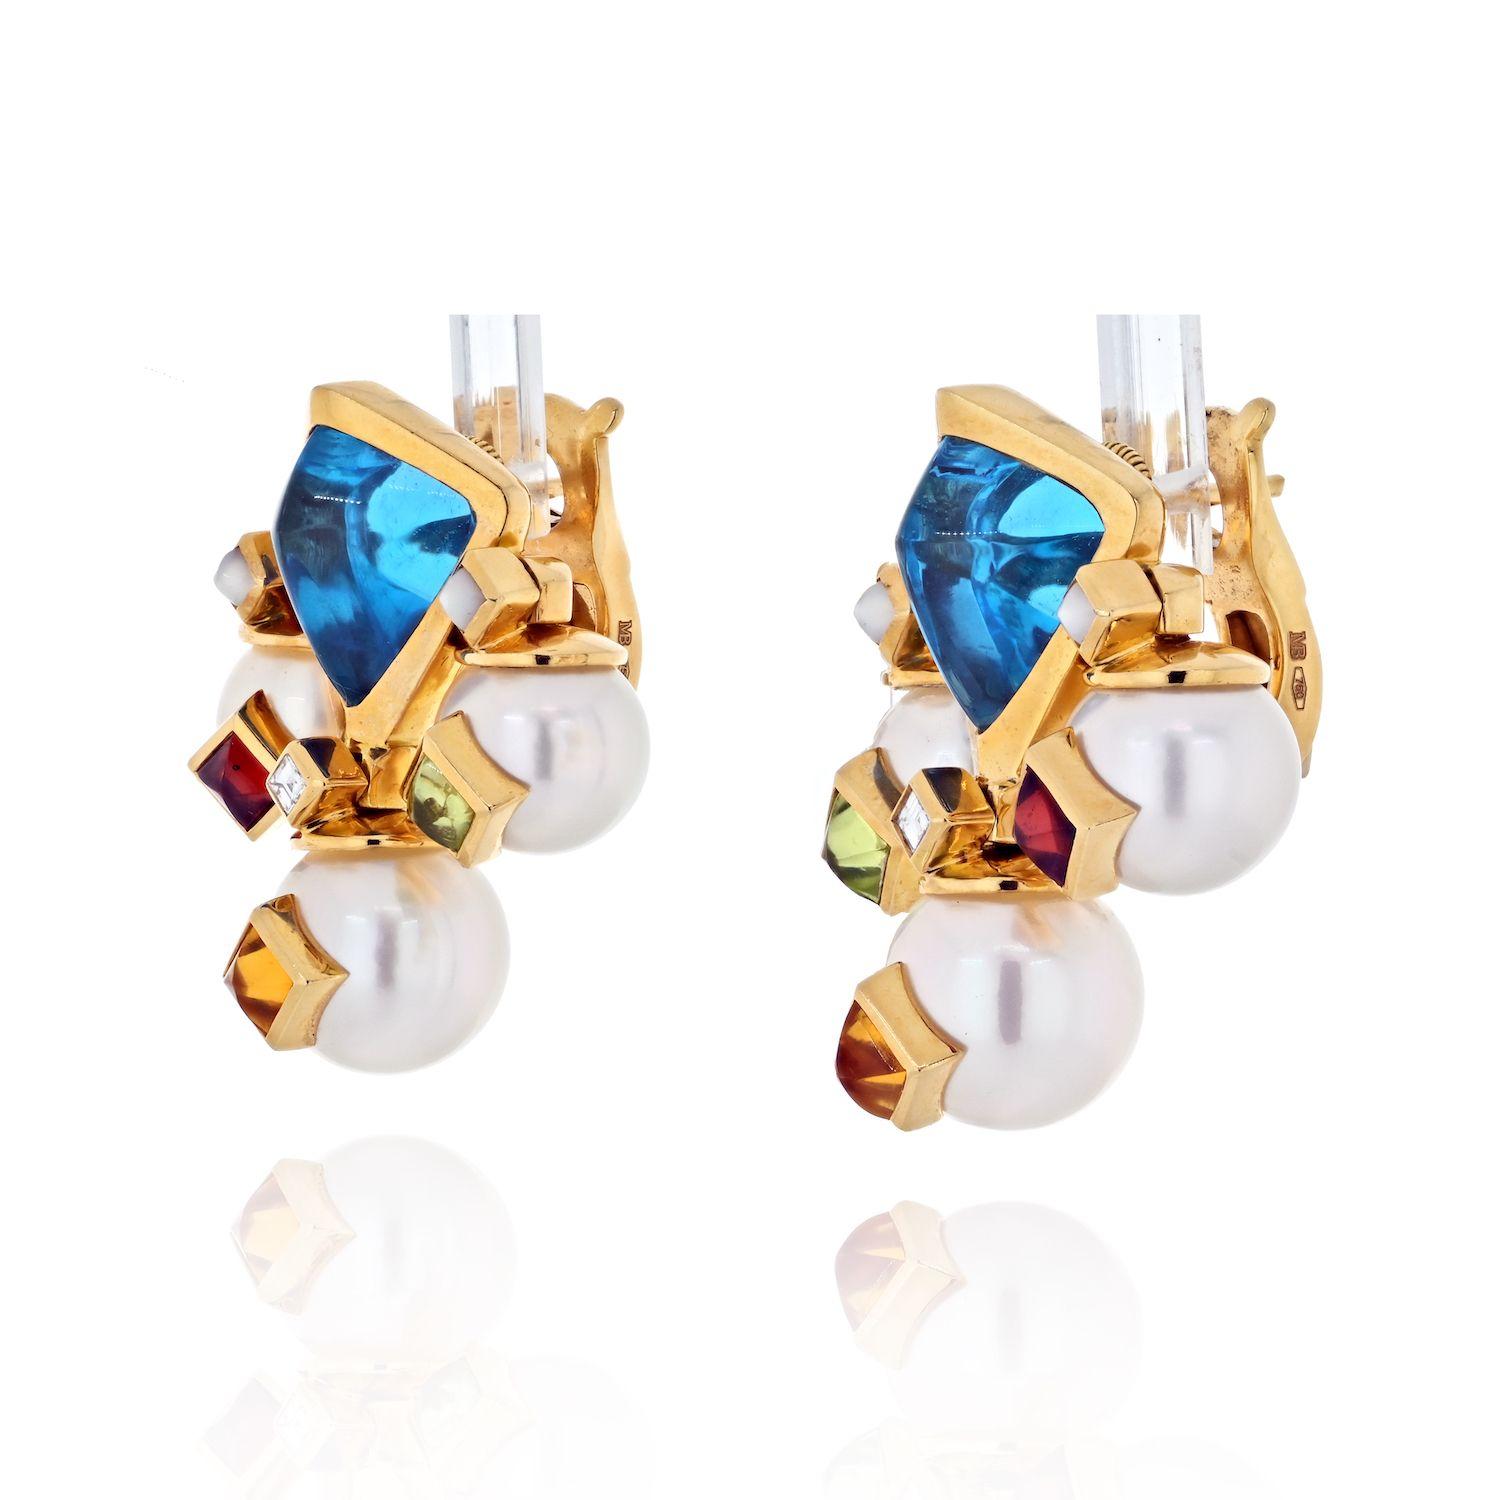 18K Yellow Gold Diamond Gem Stones Earrings by Marina B.

0.11ct TW Square F-G VS Diamonds

13.22ct TW Rhomboid Topaz Blue Center Stone

1.91ct TW Square Multi Gem Stones

3 White Round Pearls.

Clip closure posts can be added.